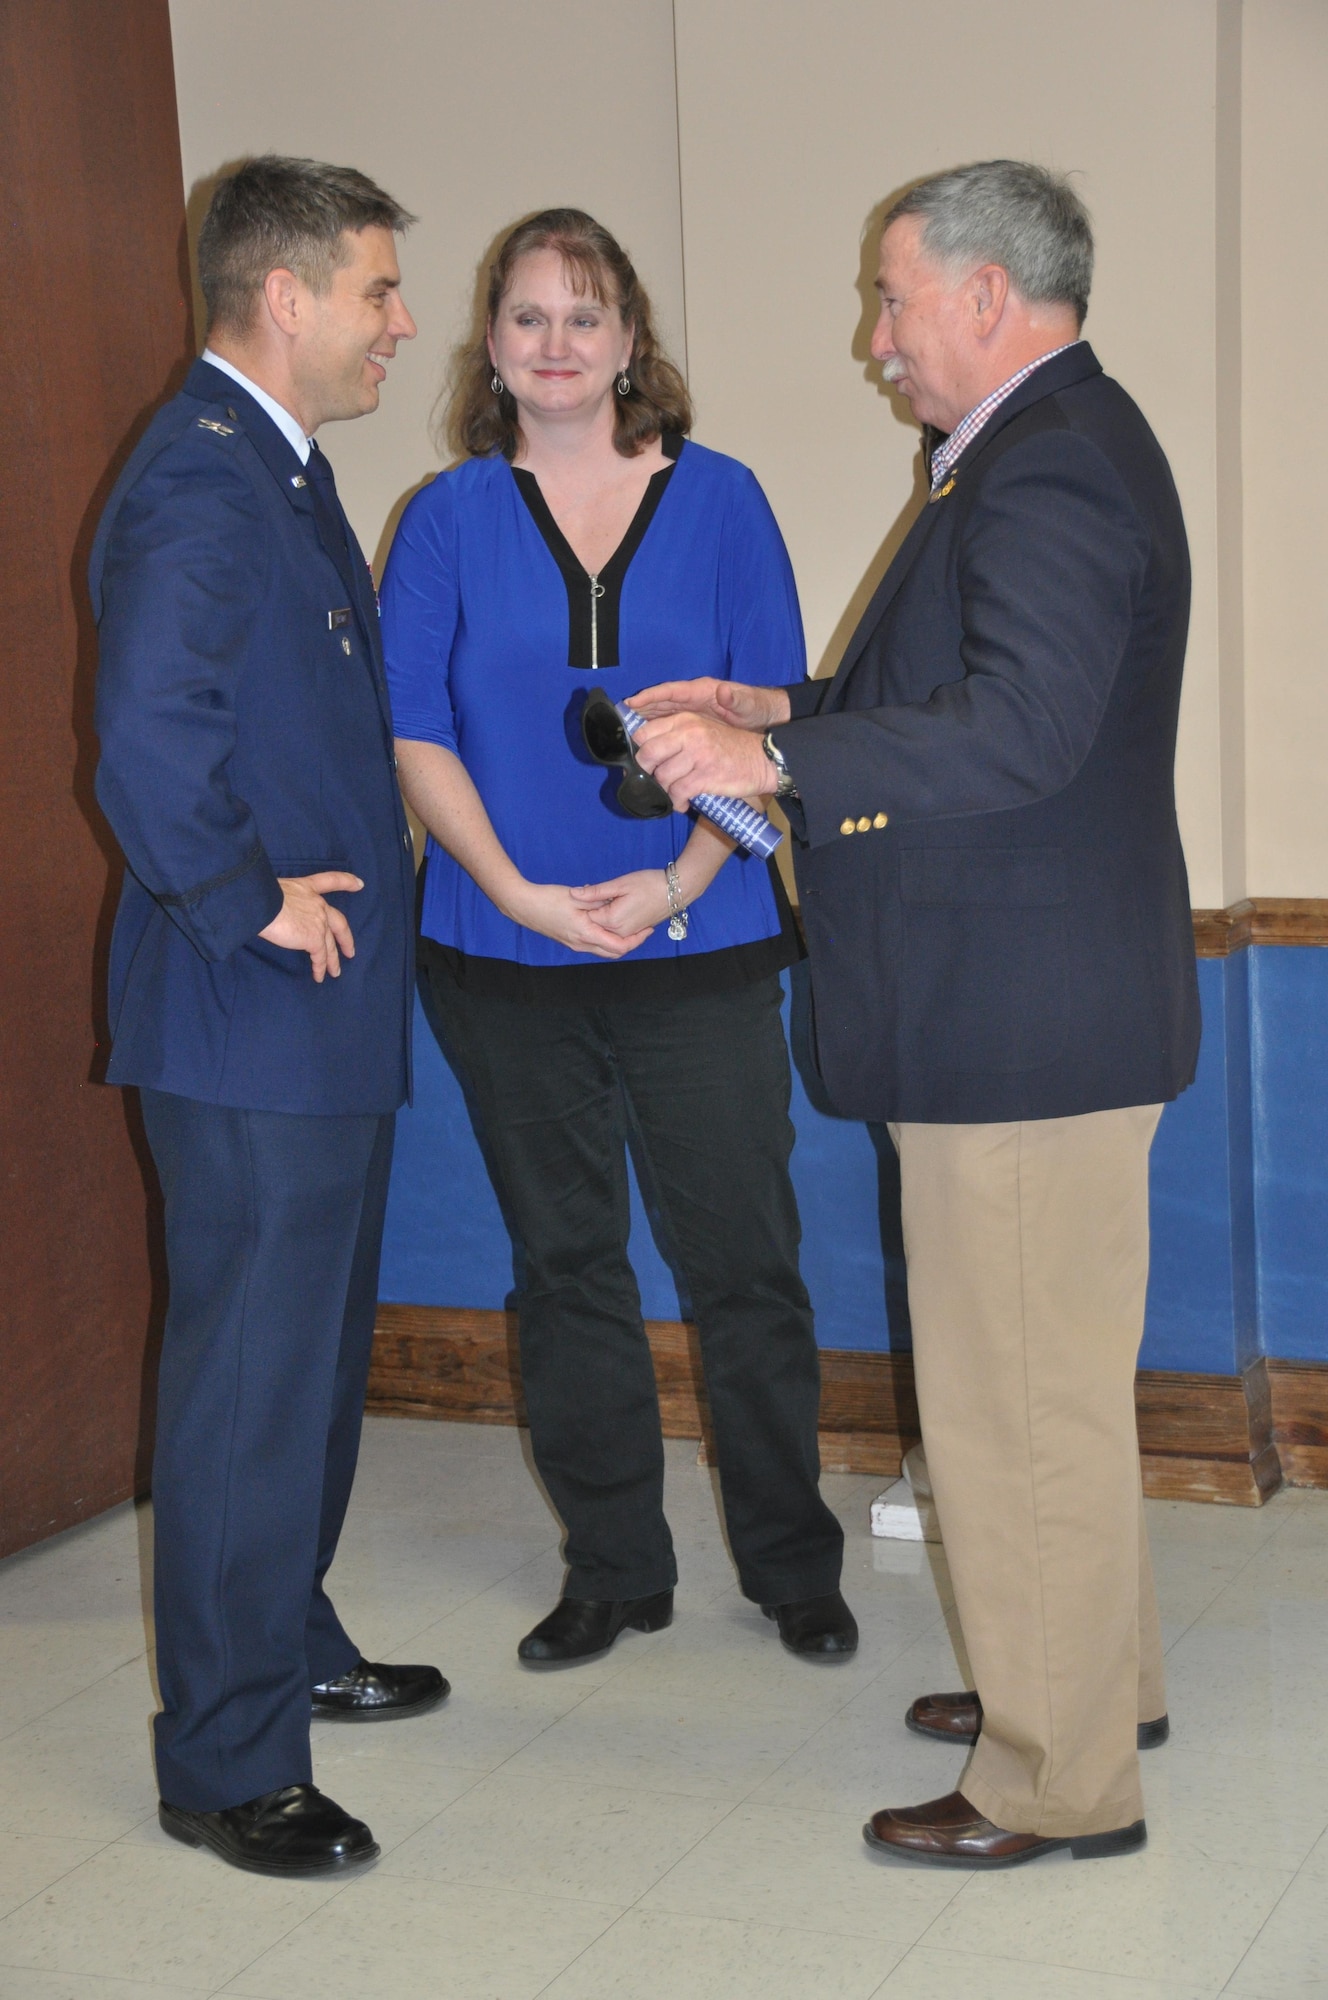 Commander of the 908th Airlift Wing, Col Ken Ostrat and his wife Lora catch up with an old friend, Mike Harper, retired chief loadmaster for the wing, following Ostrat’s Assumption of Command ceremony March 5 at Maxwell Air Force Base. Ostrat and Harper worked together during Ostrat’s previous stint with the wing as the 357th Airlift Squadron’s director of operations from 2008 until 2012. (U.S. Air Force photo by Bradley J. Clark)